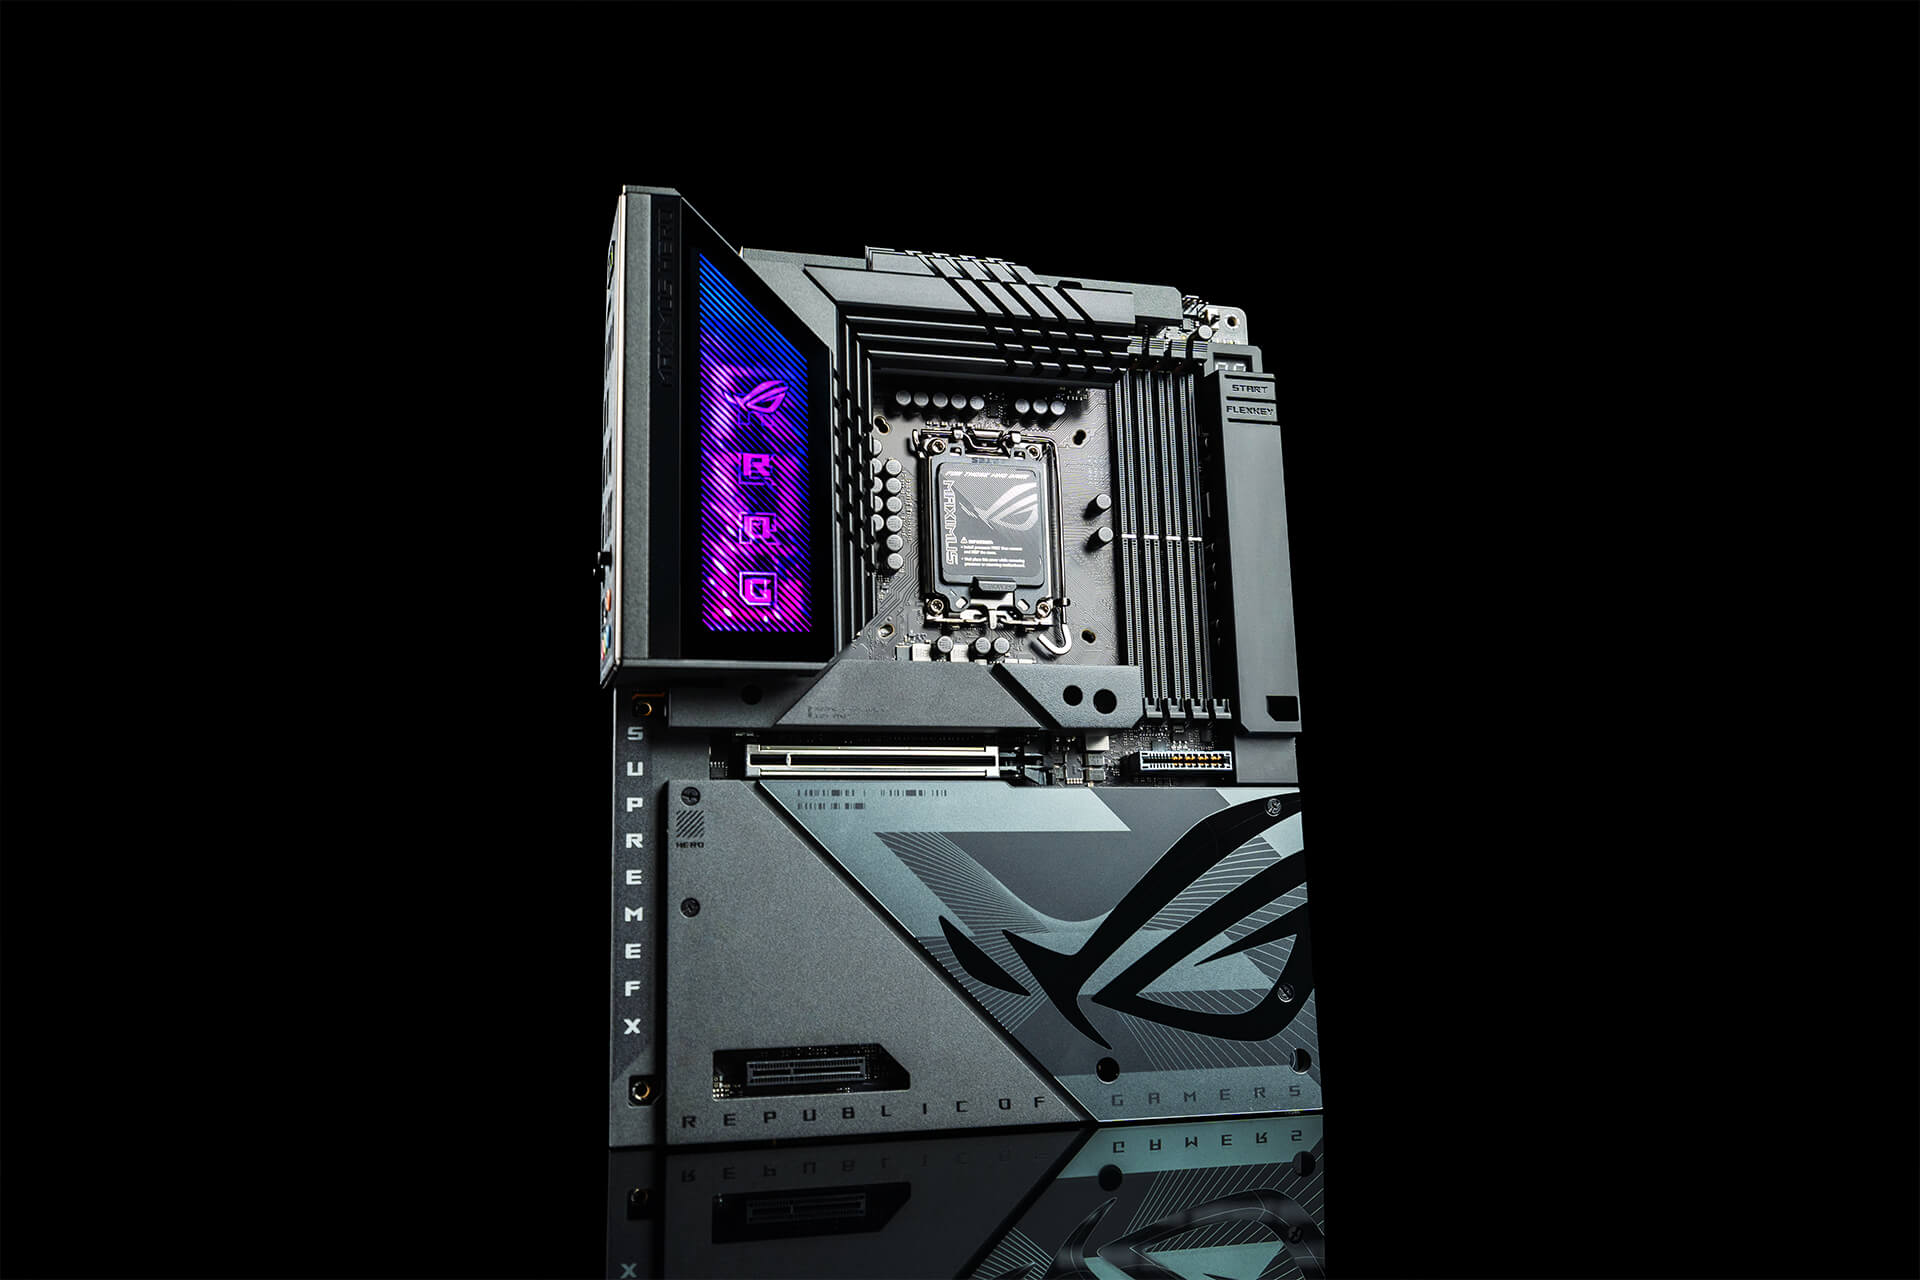 A 60˚ angle of ROG MAXIMUS Z790 HERO BTF motherboard stands in the middle with black background.